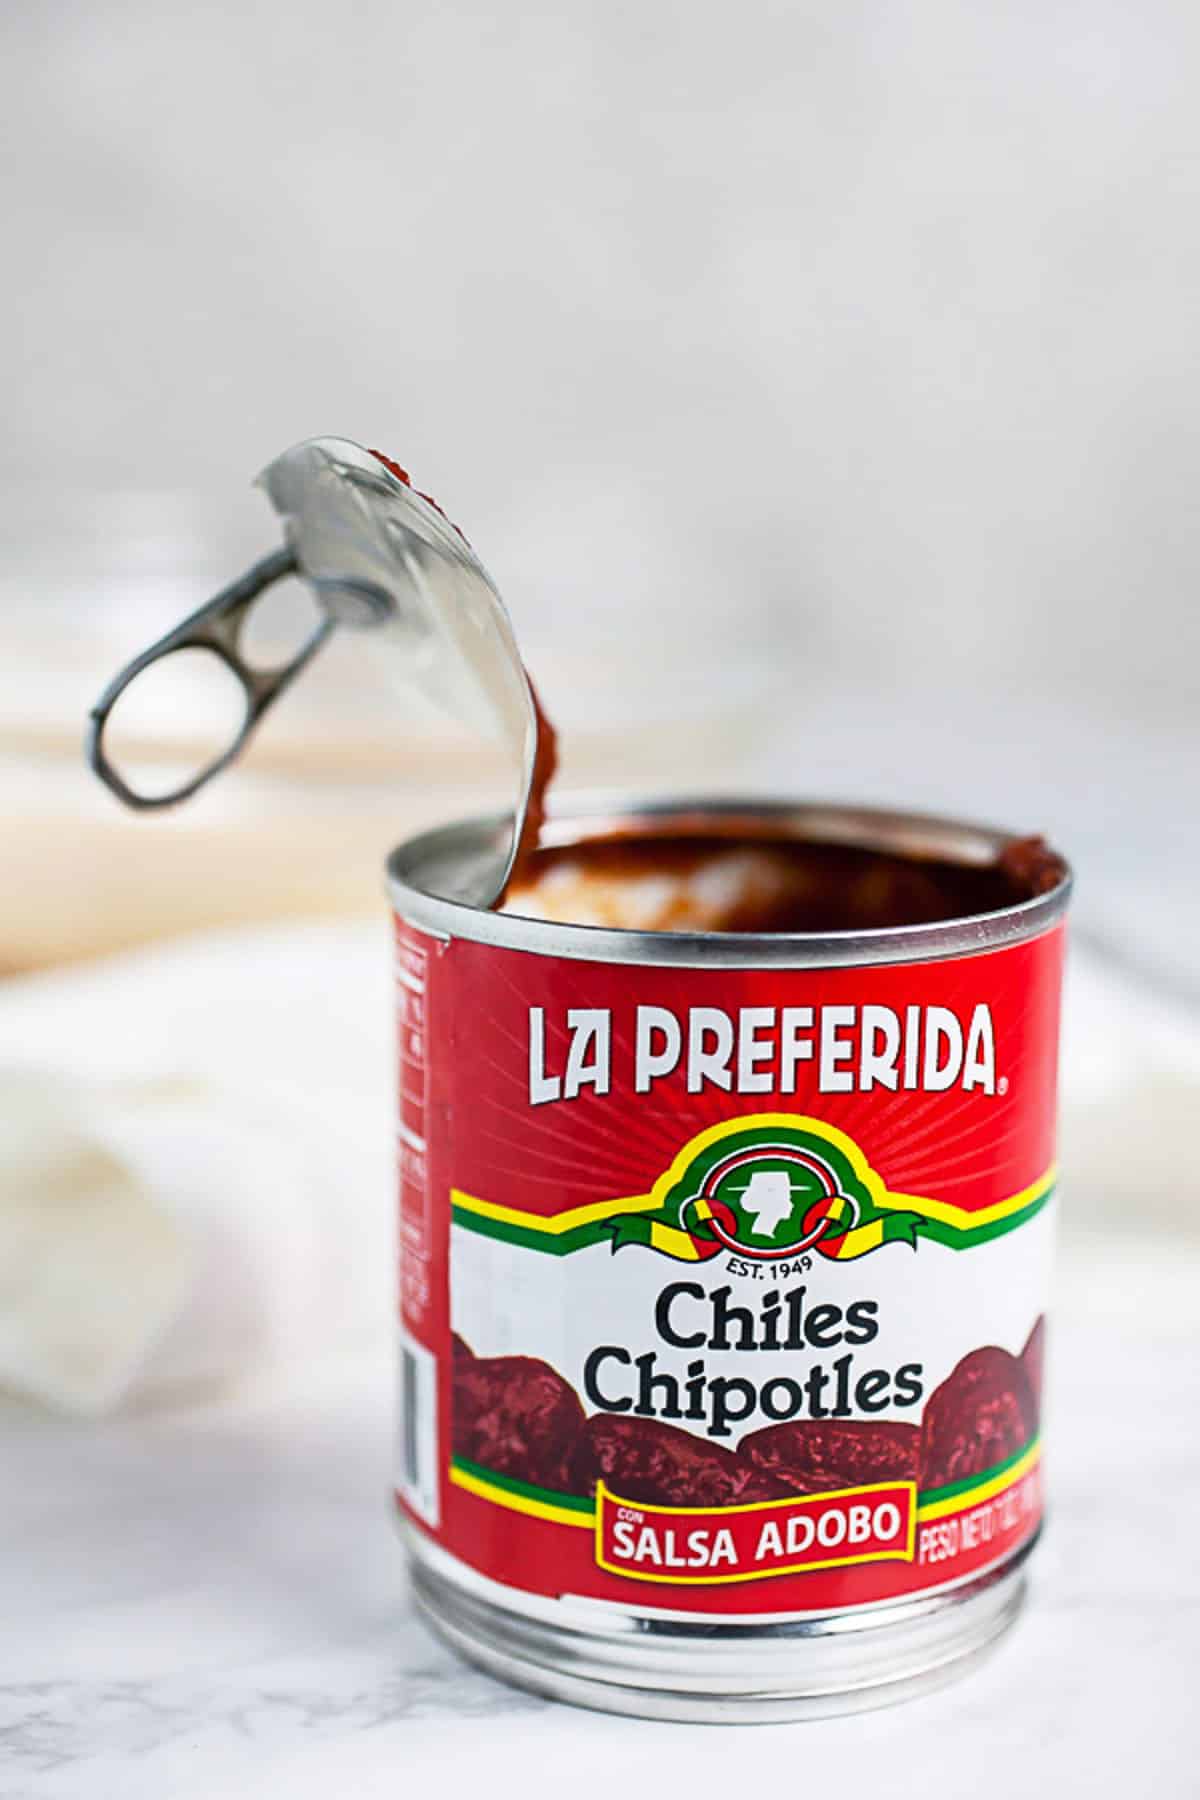 Opened can of chipotle peppers in adobo sauce.